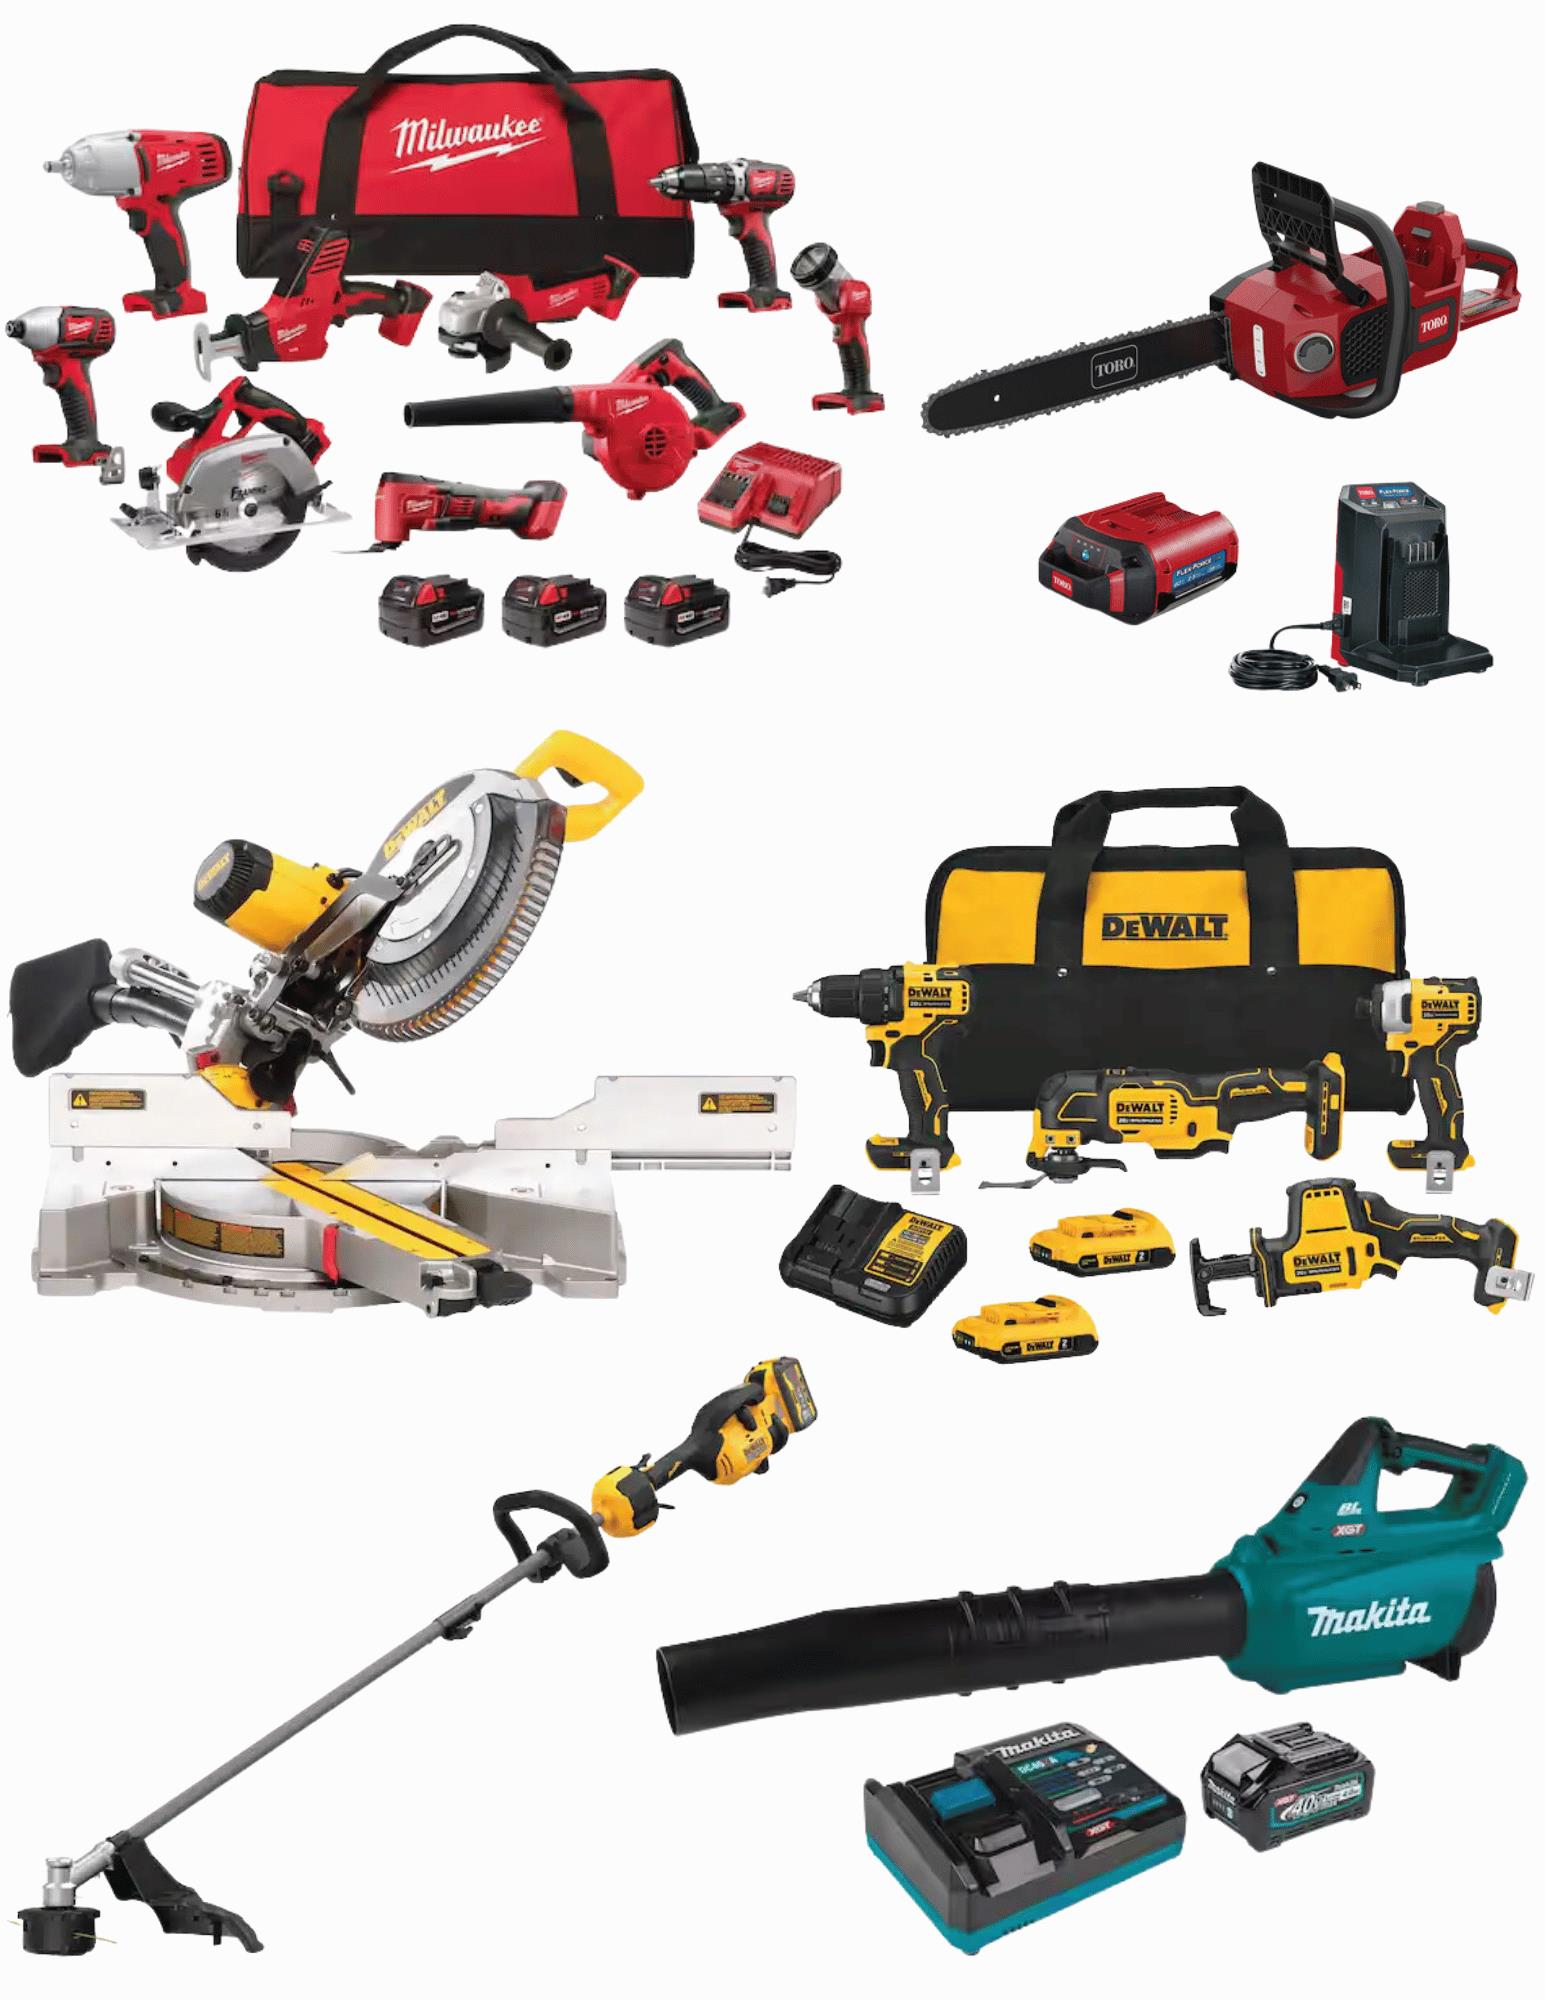 PA 24-21901: 26 Pallets of Tools, Outdoor, Appliances